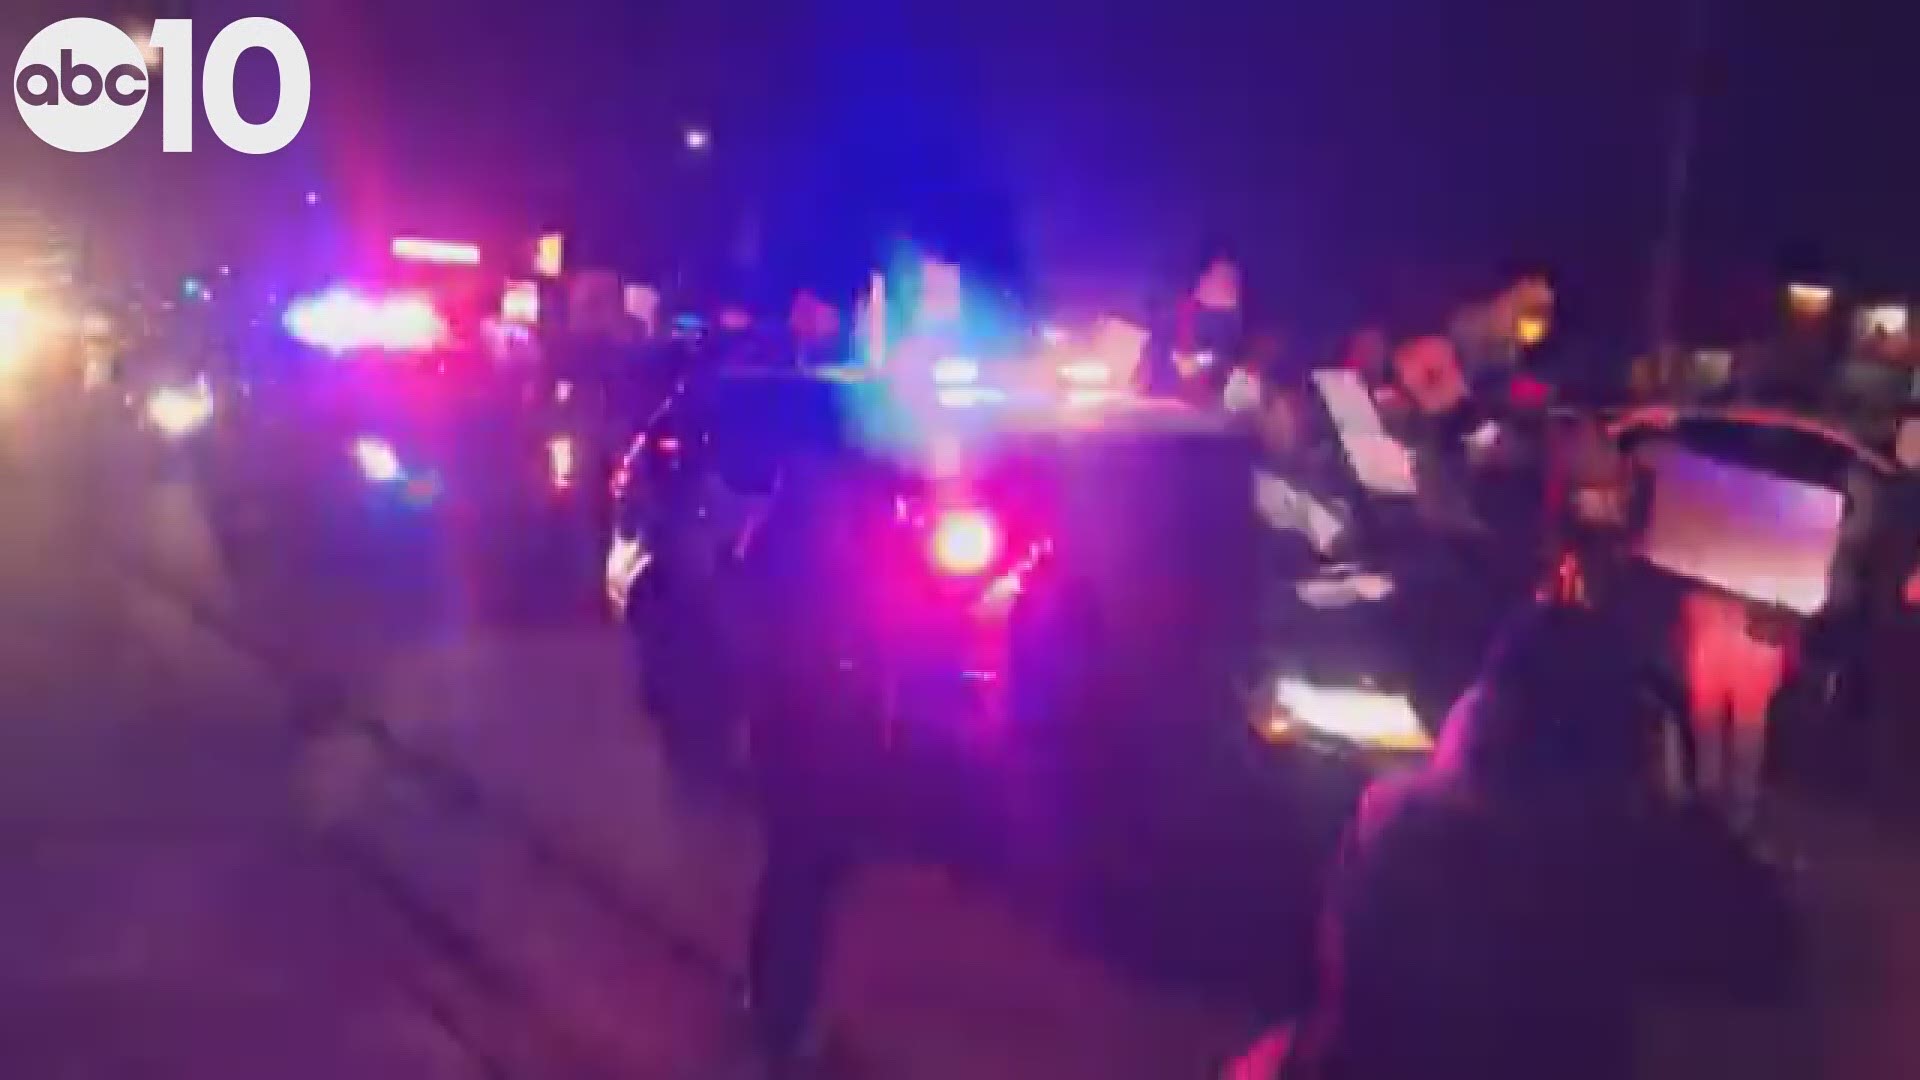 A Sheriff's deputy driving an SUV hit a protester at an intersection at the #StephonClark vigil, according to our crew at the scene.